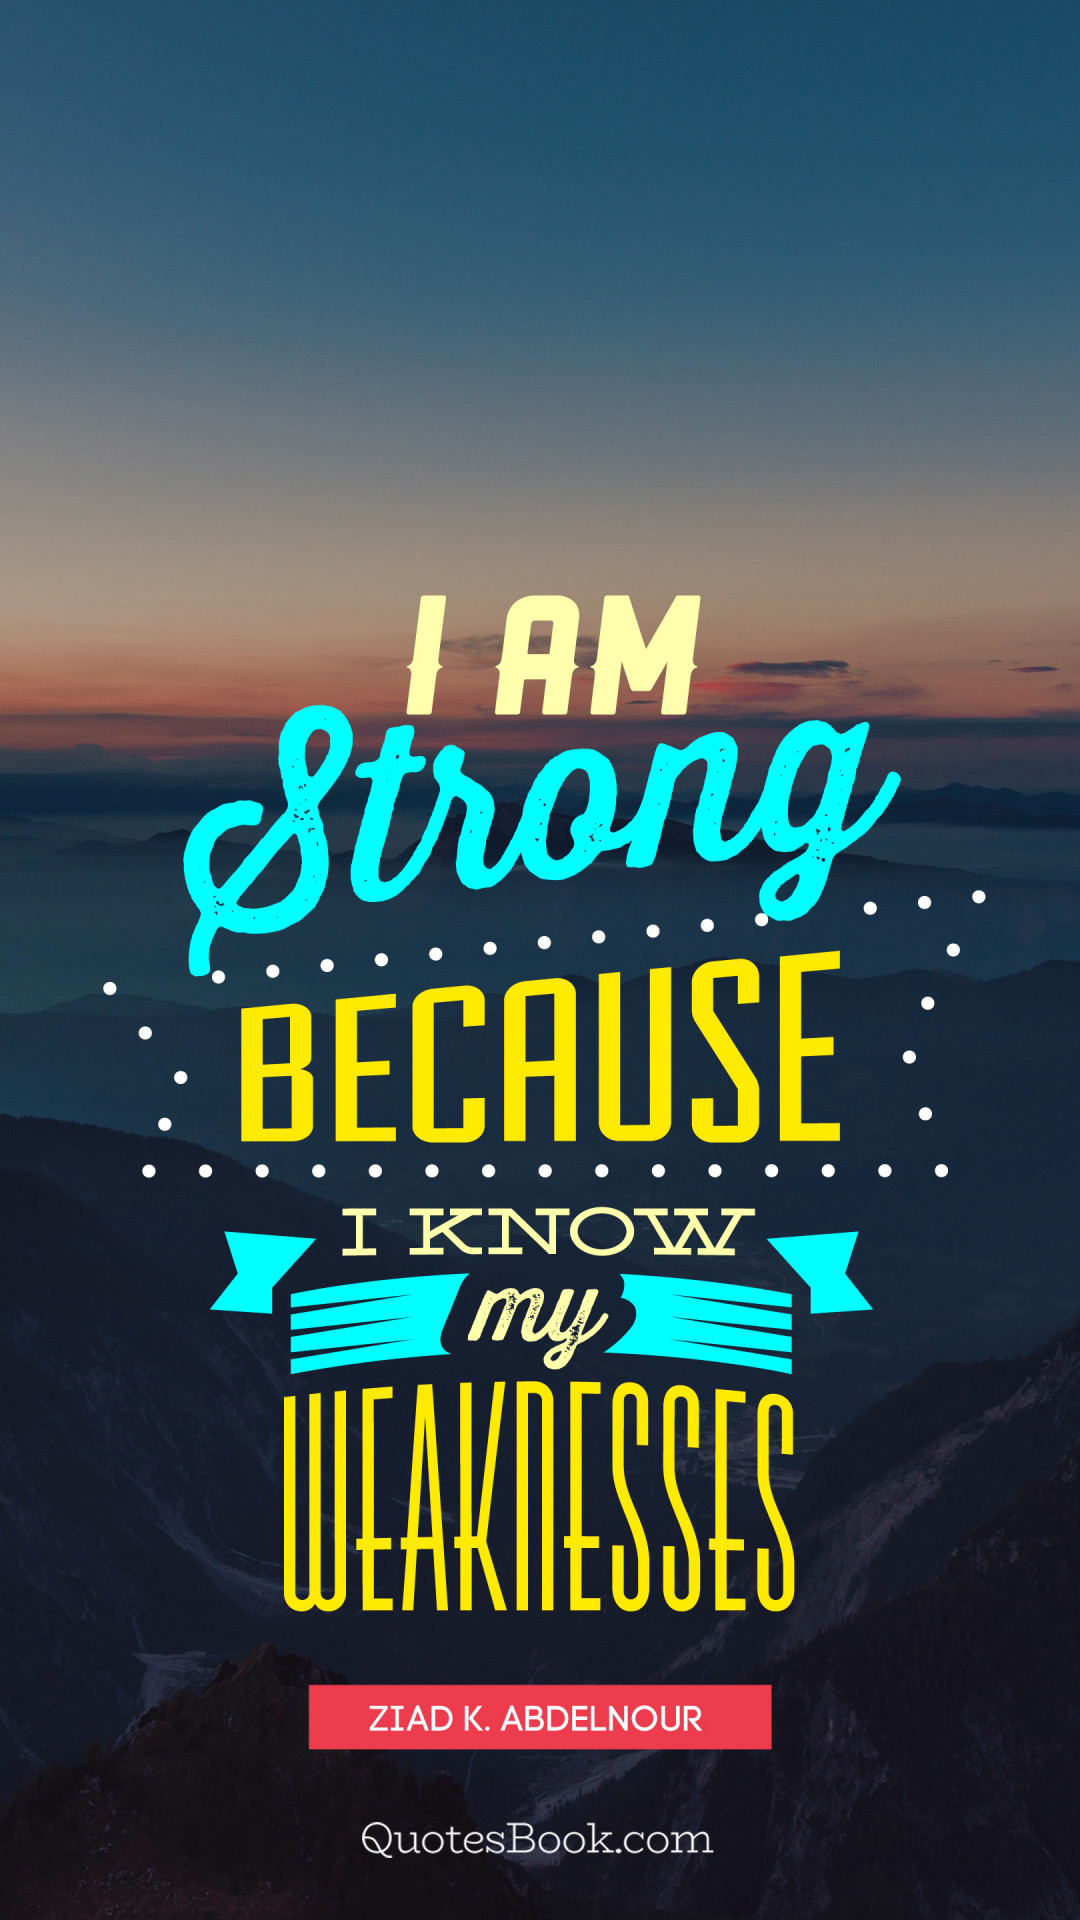 i am strong because essay